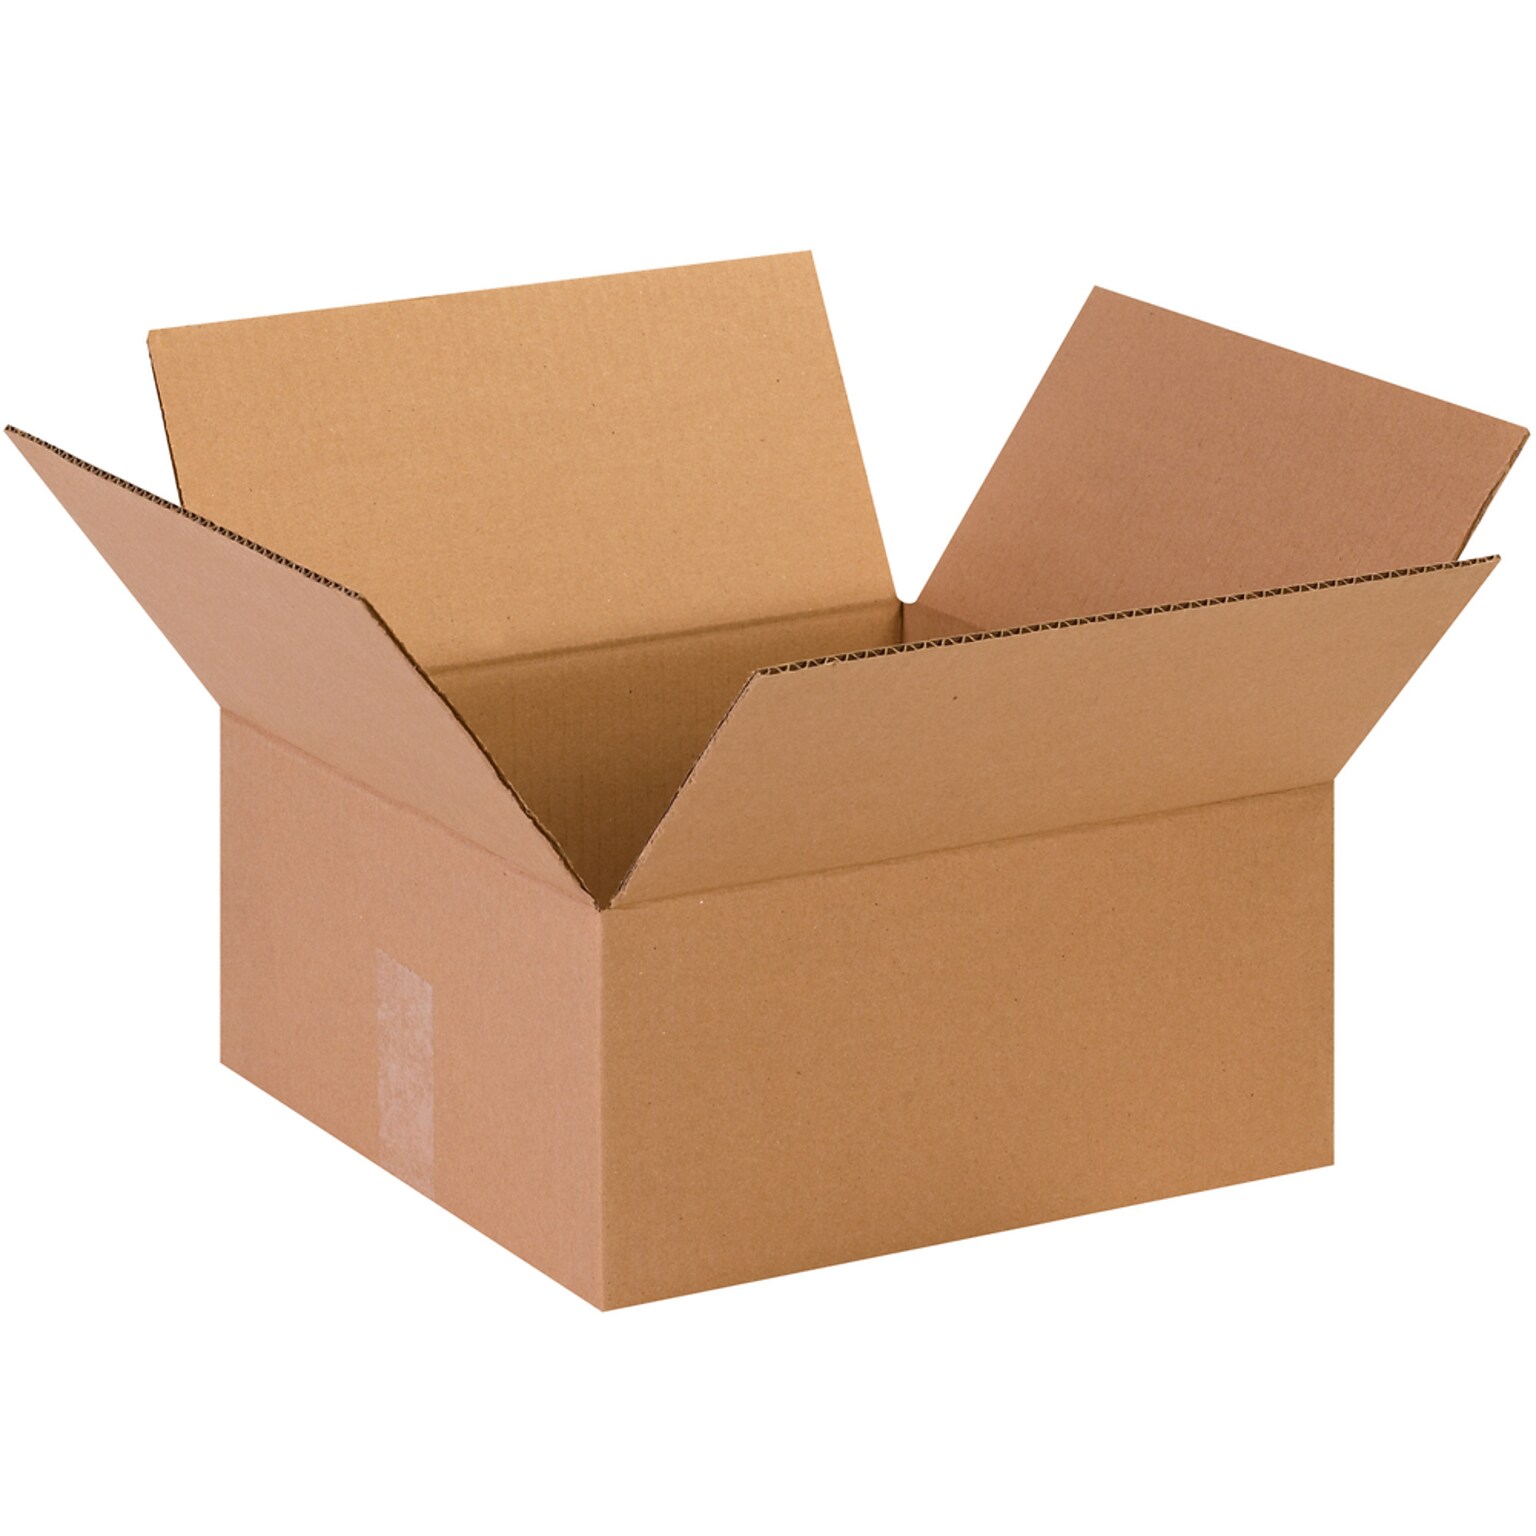 Quill Brand 13 x 13 x 6 Corrugated Shipping Boxes, 200#/ECT-32 Mullen Rated Corrugated, Pack of 25, (13136)